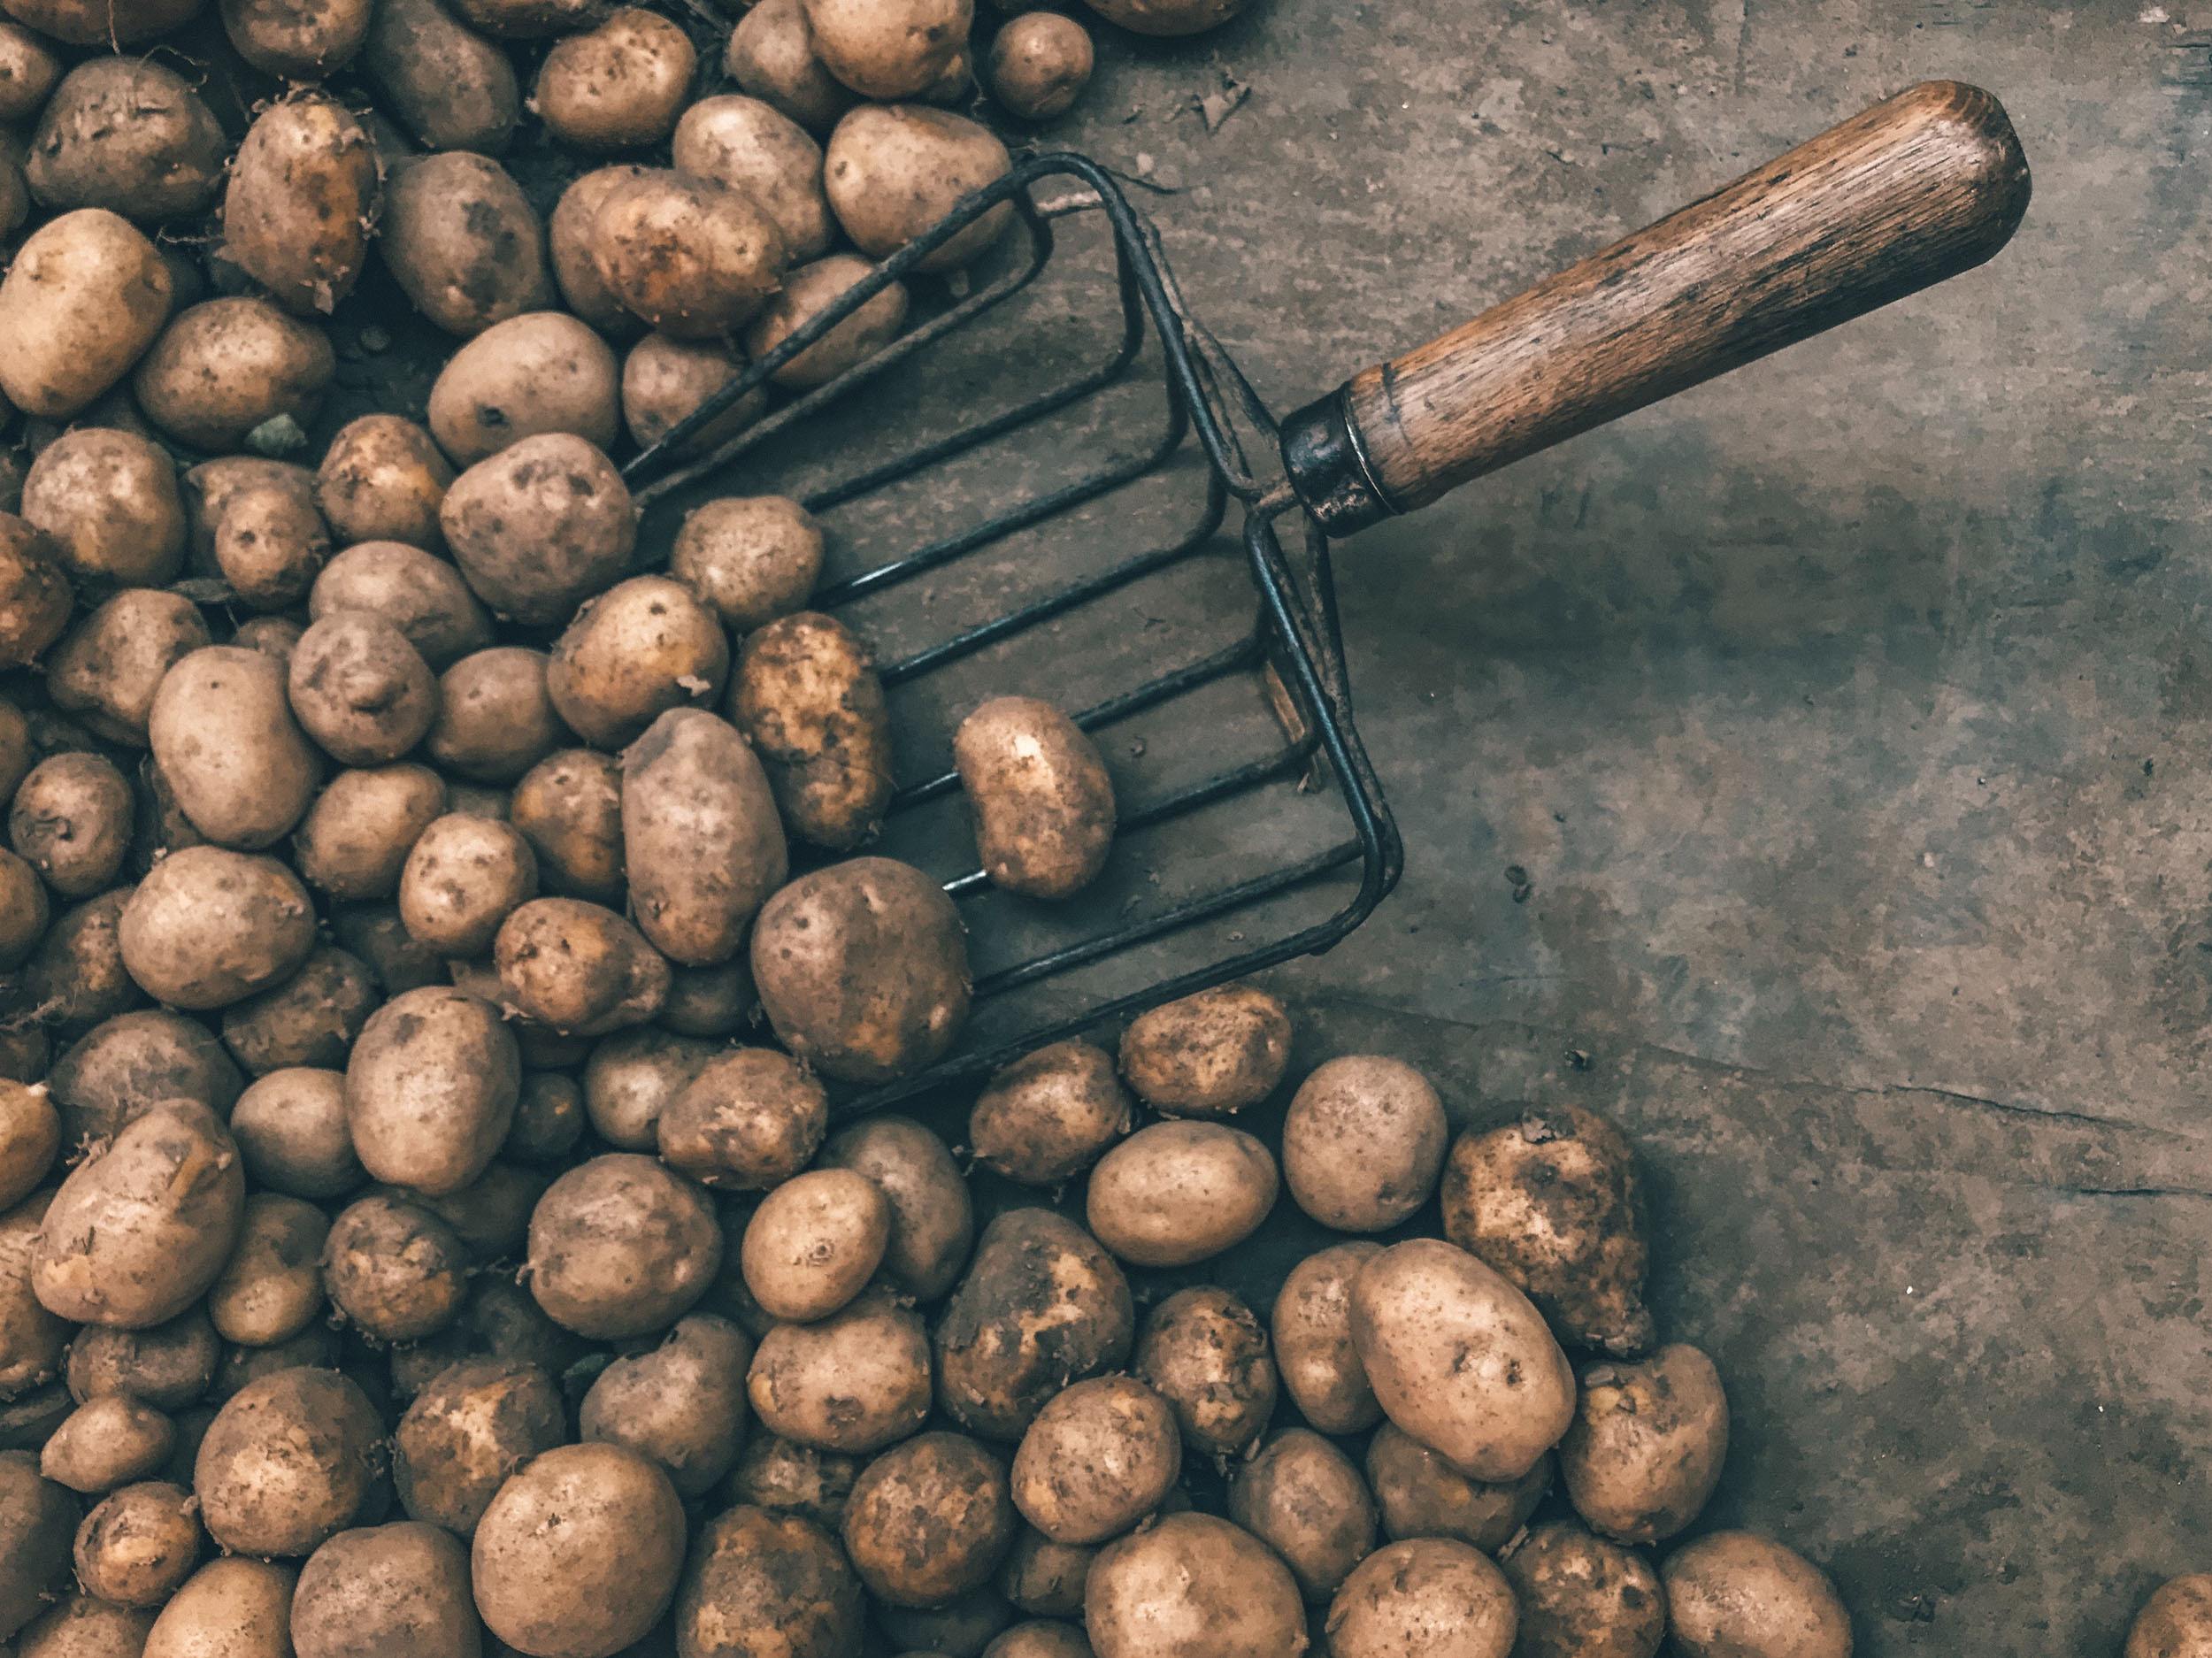 Brushed potatoes on the ground beside a shovel